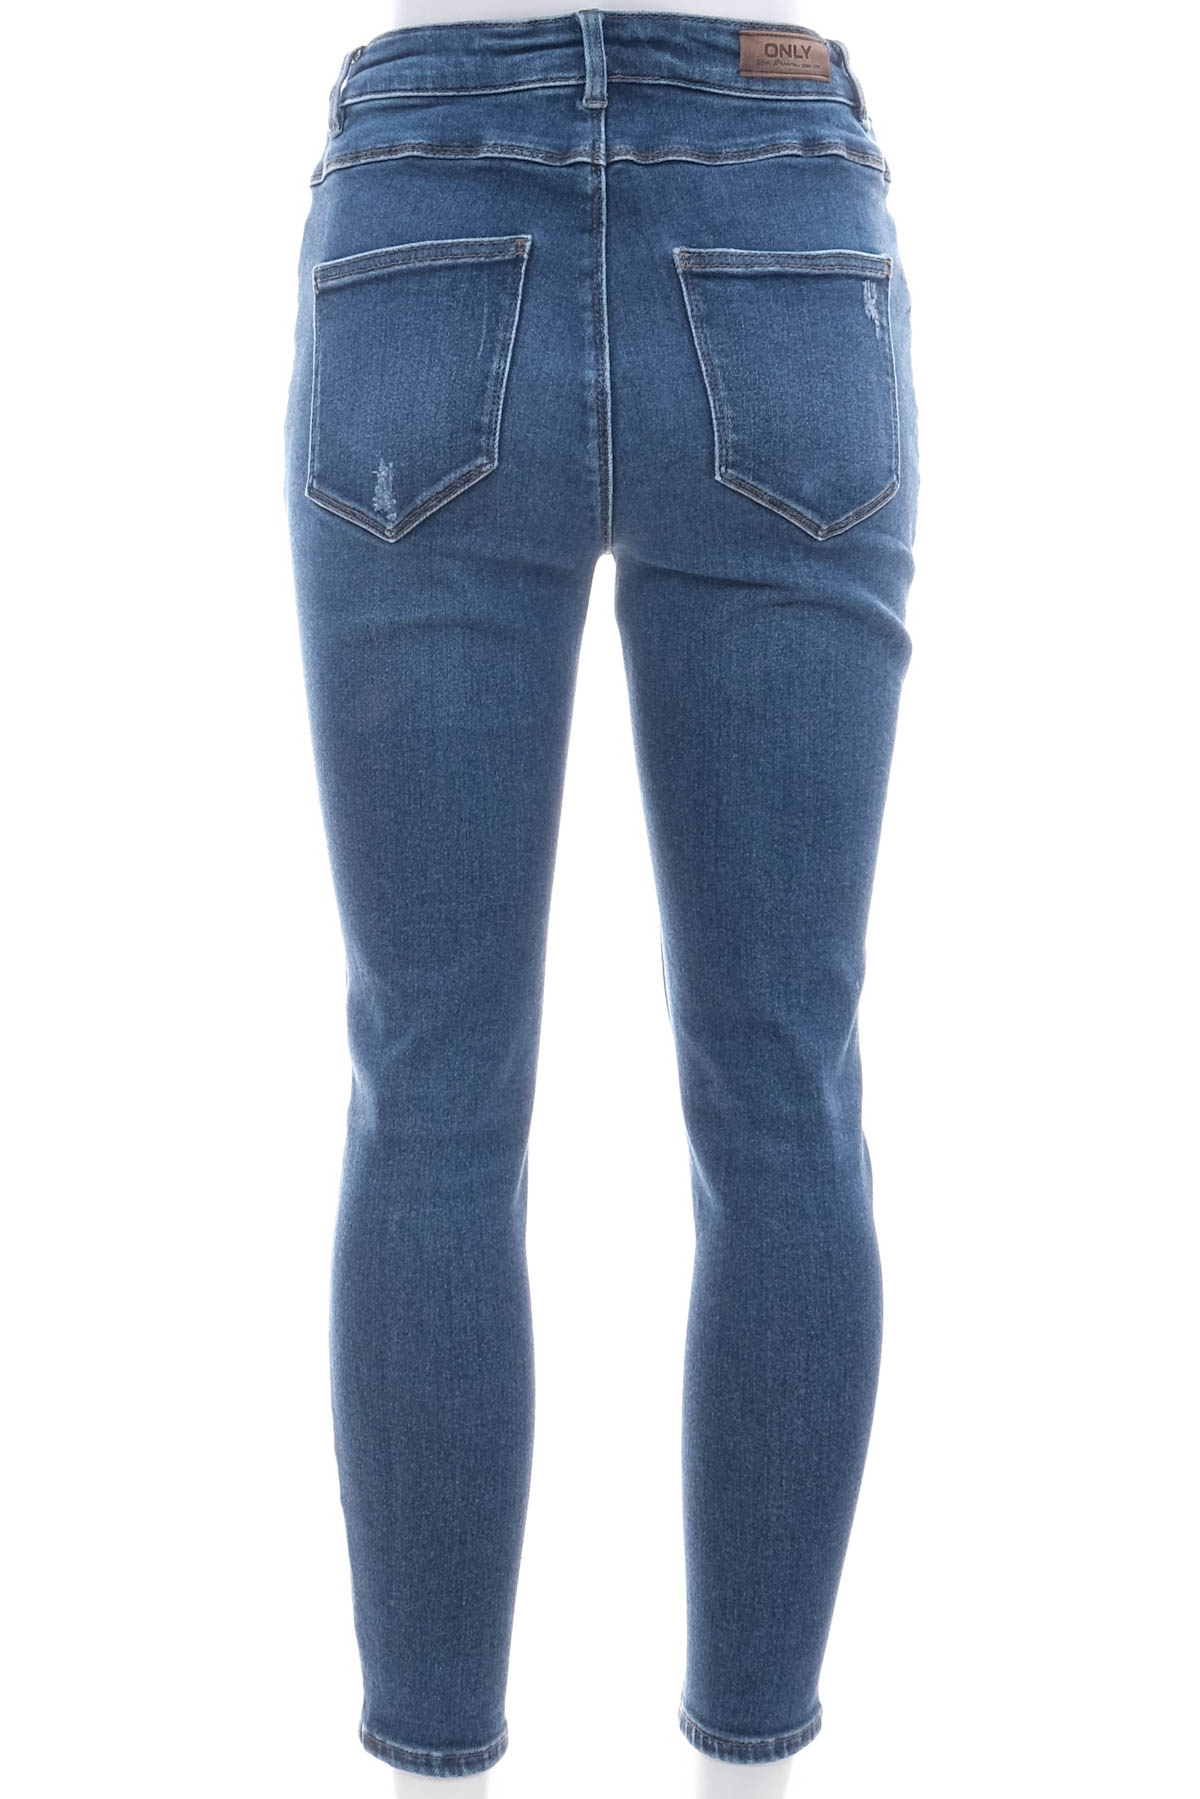 Women's jeans - ONLY - 1